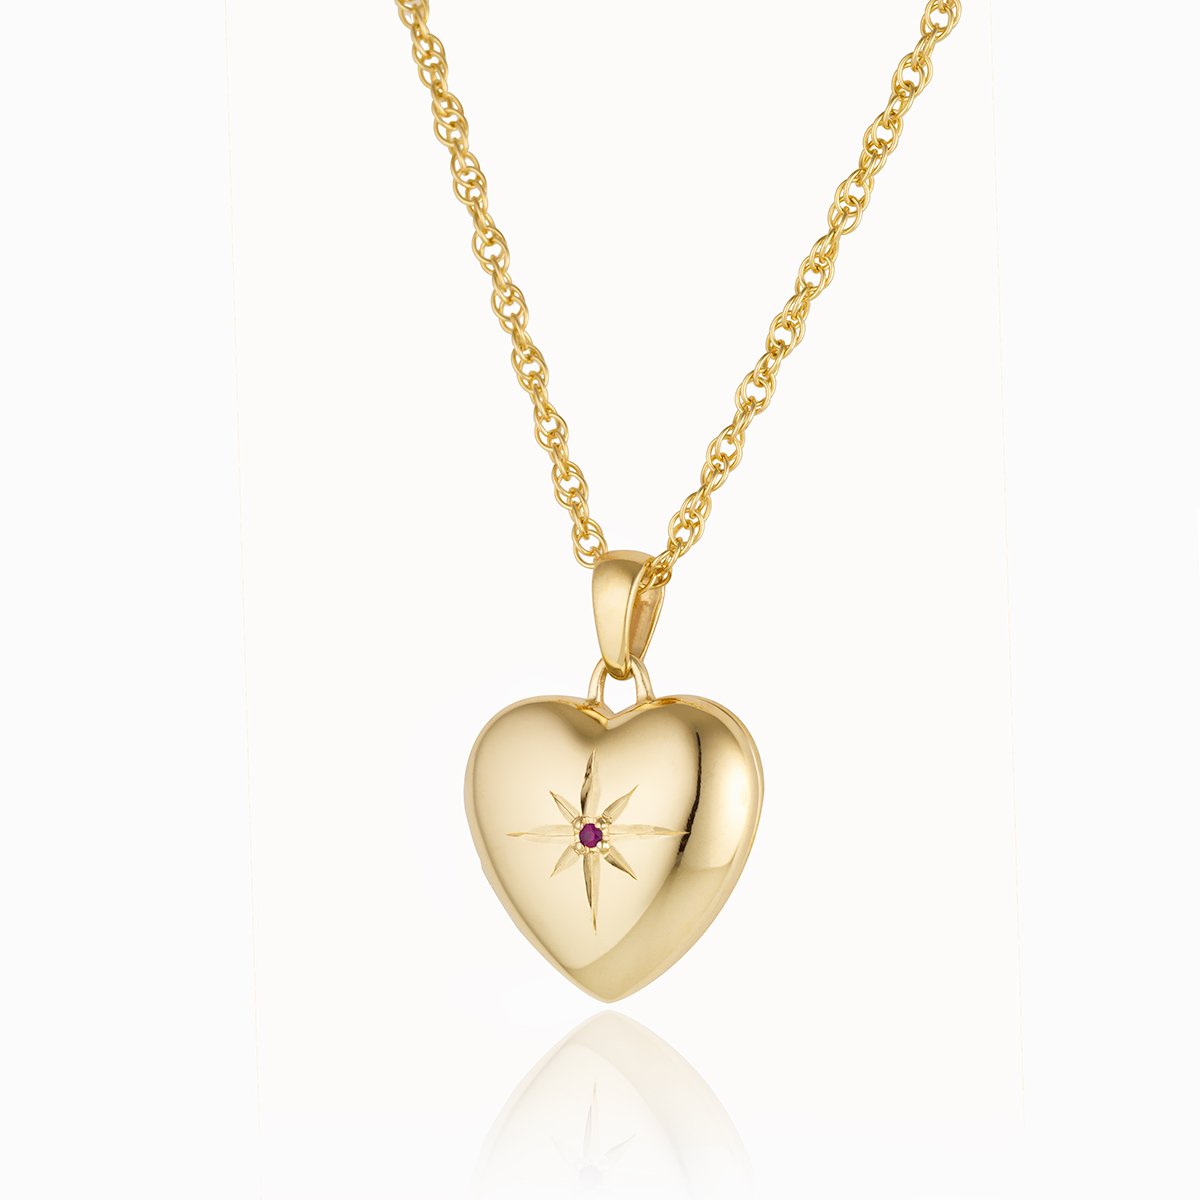 Product title: Premium Gold and Ruby Heart, product type: Locket